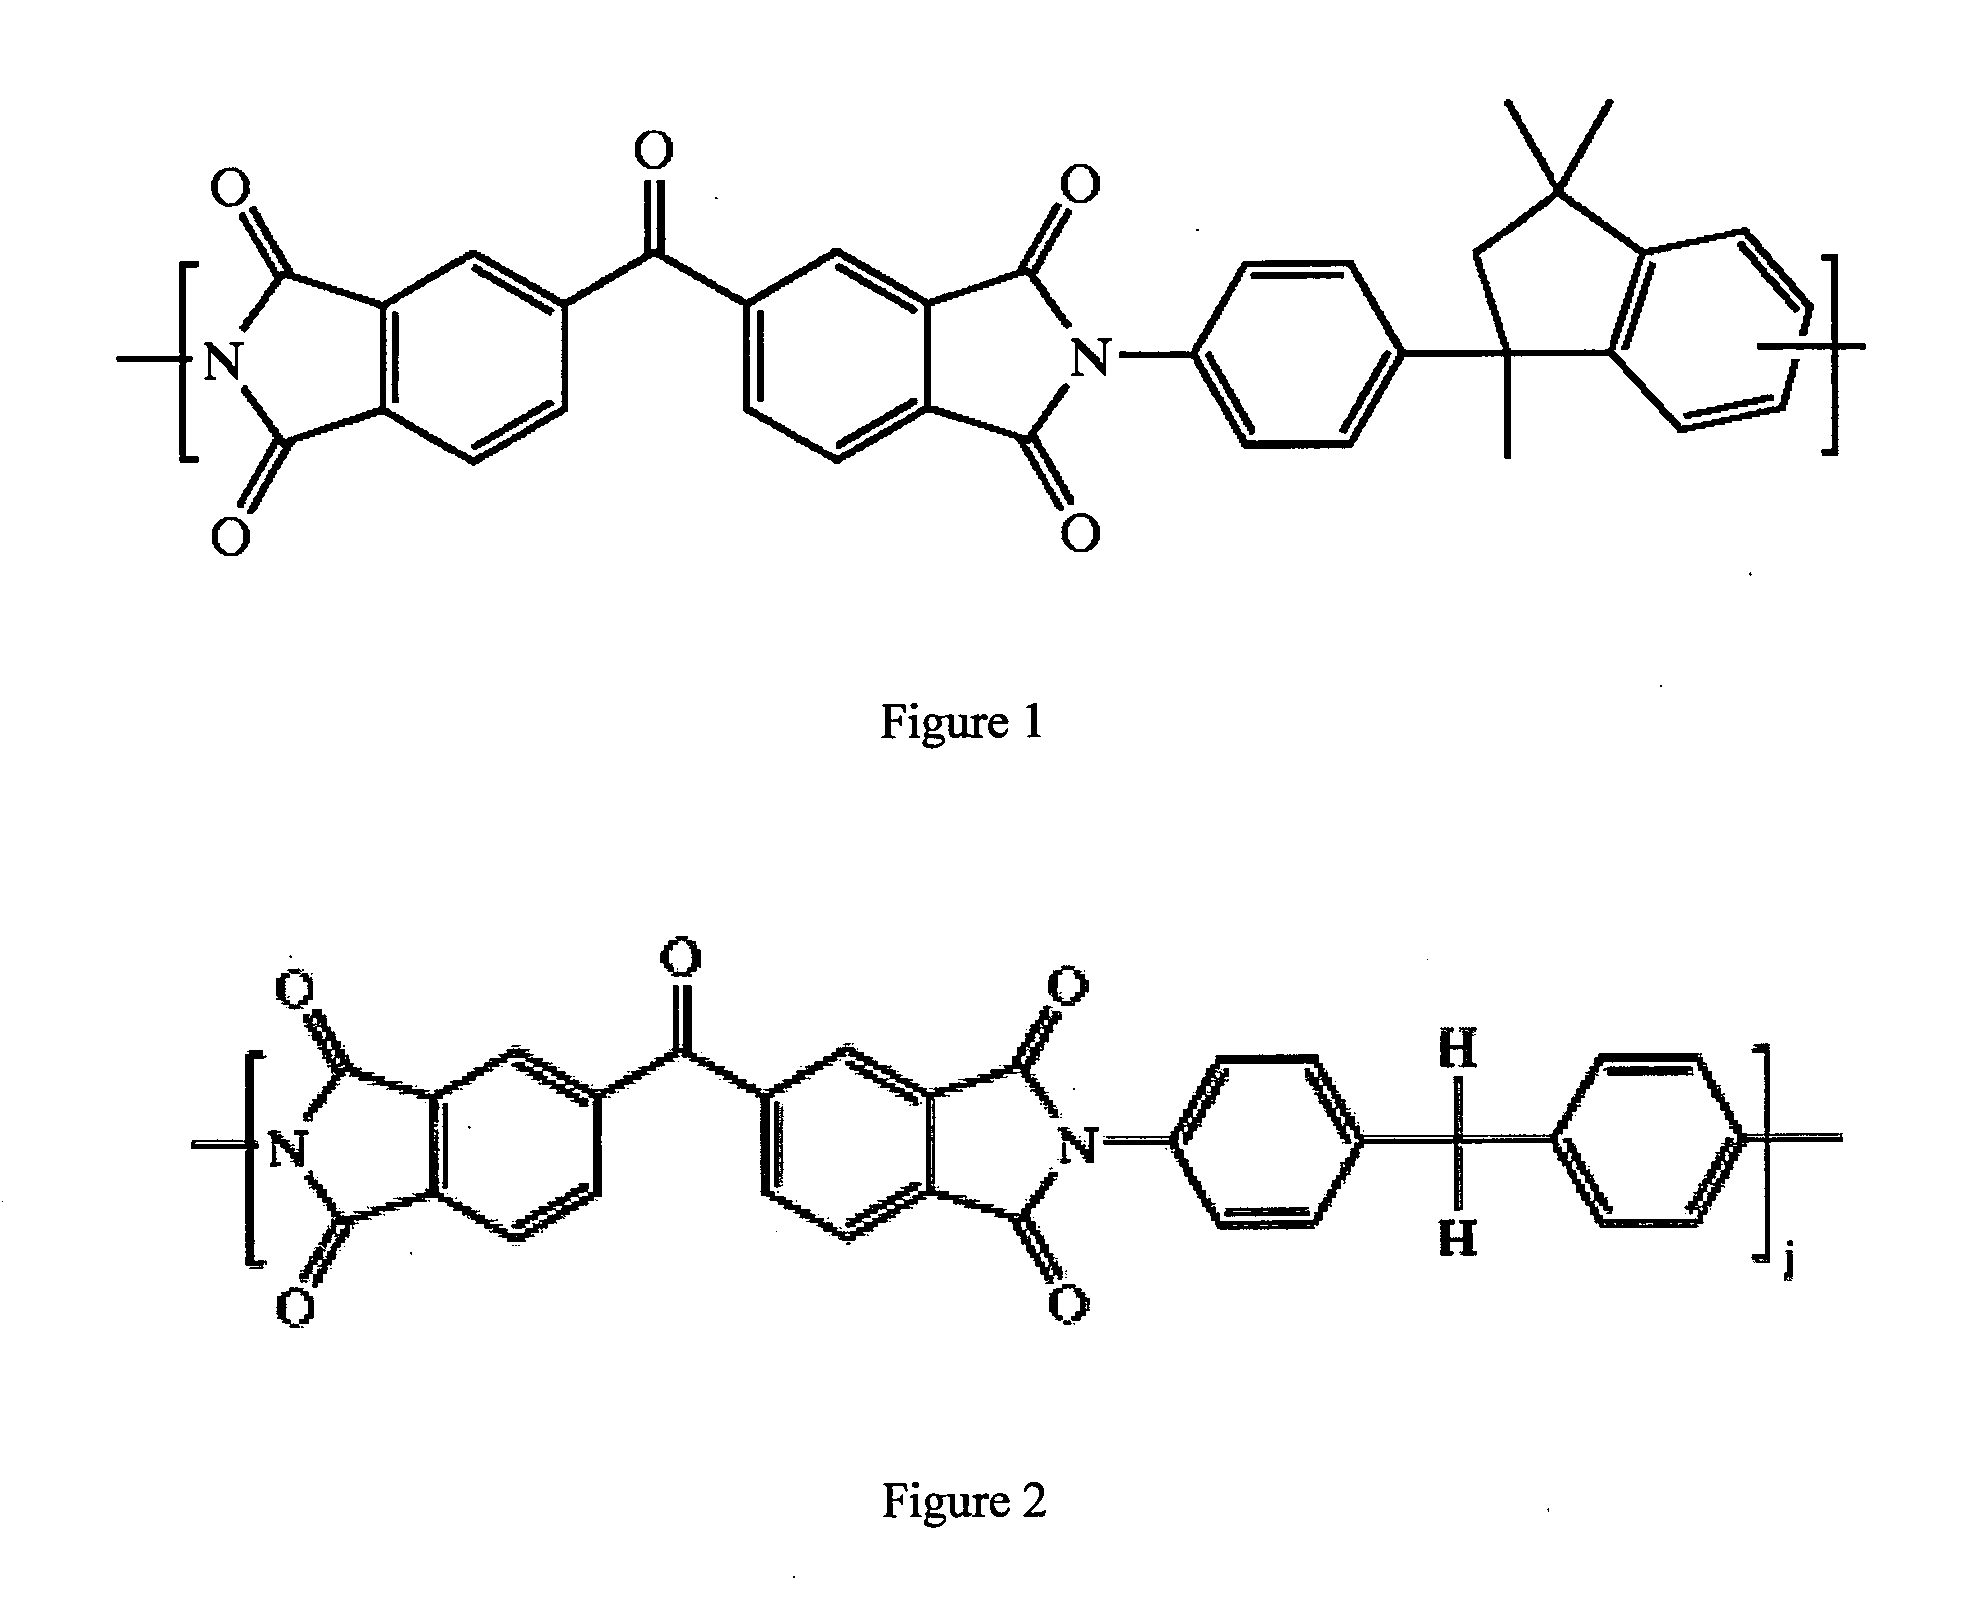 Cross-linked polyimide membranes